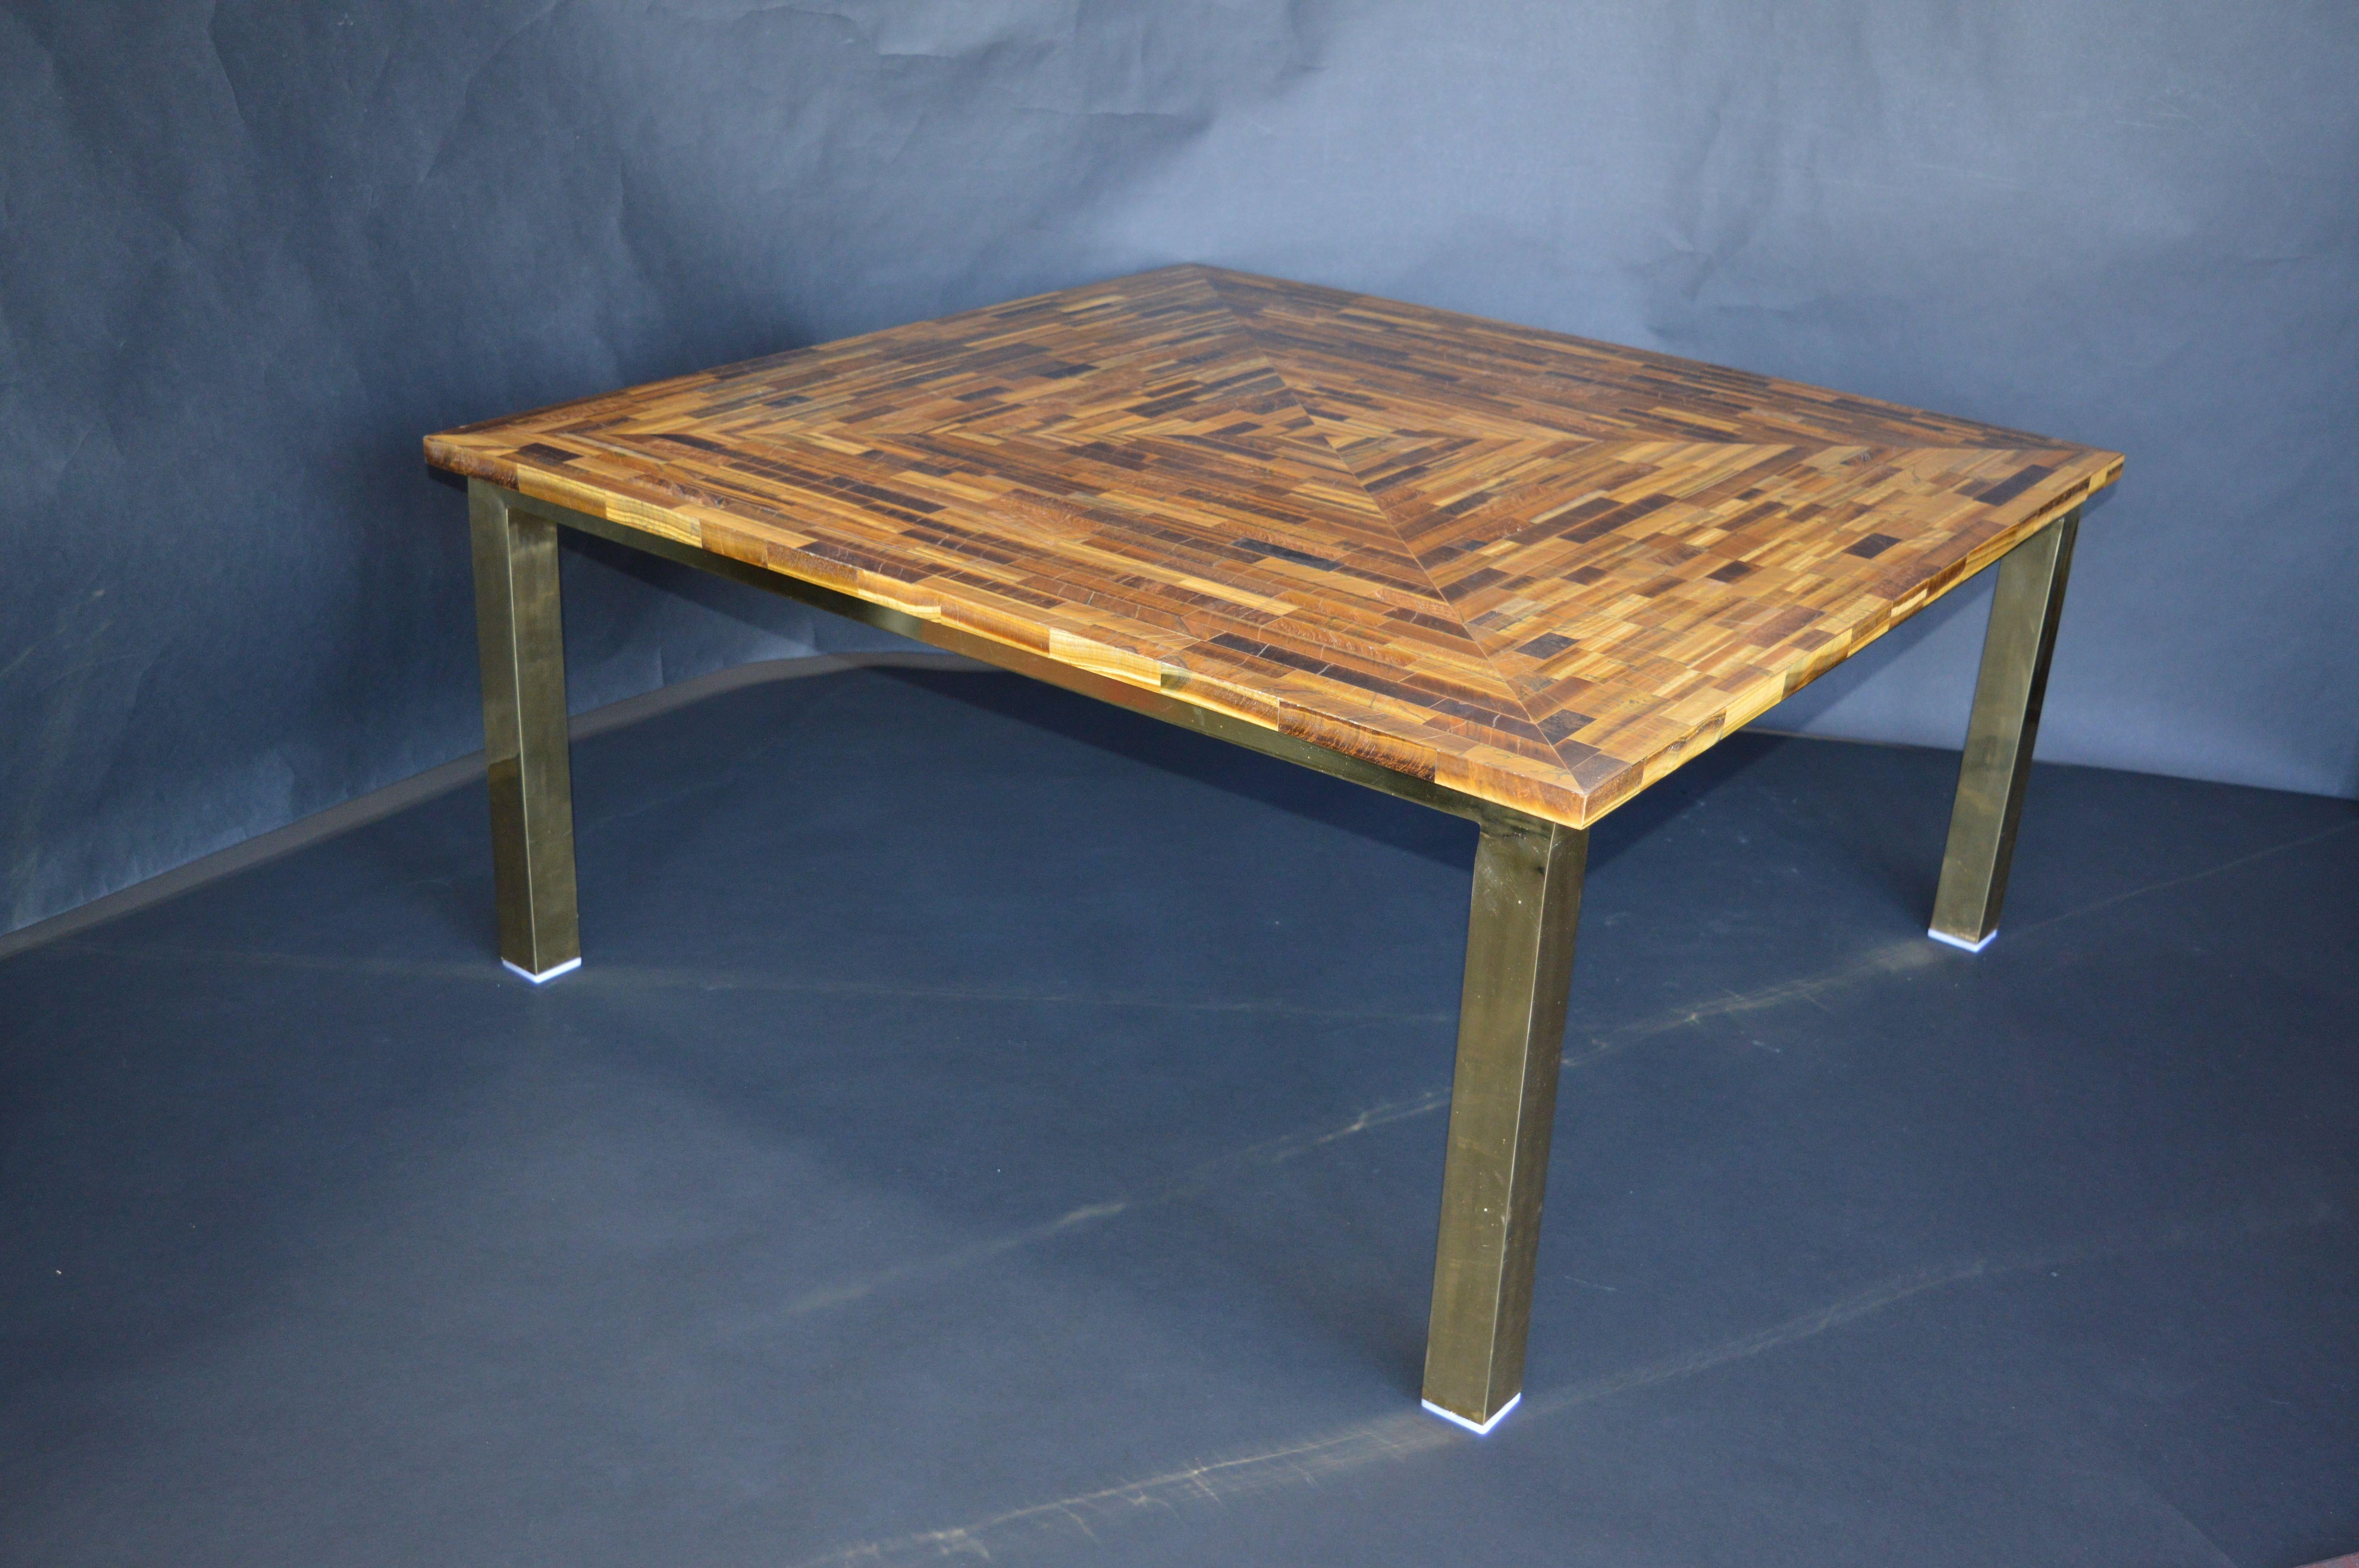 Customsquare, tiger's eye table with gold legs.